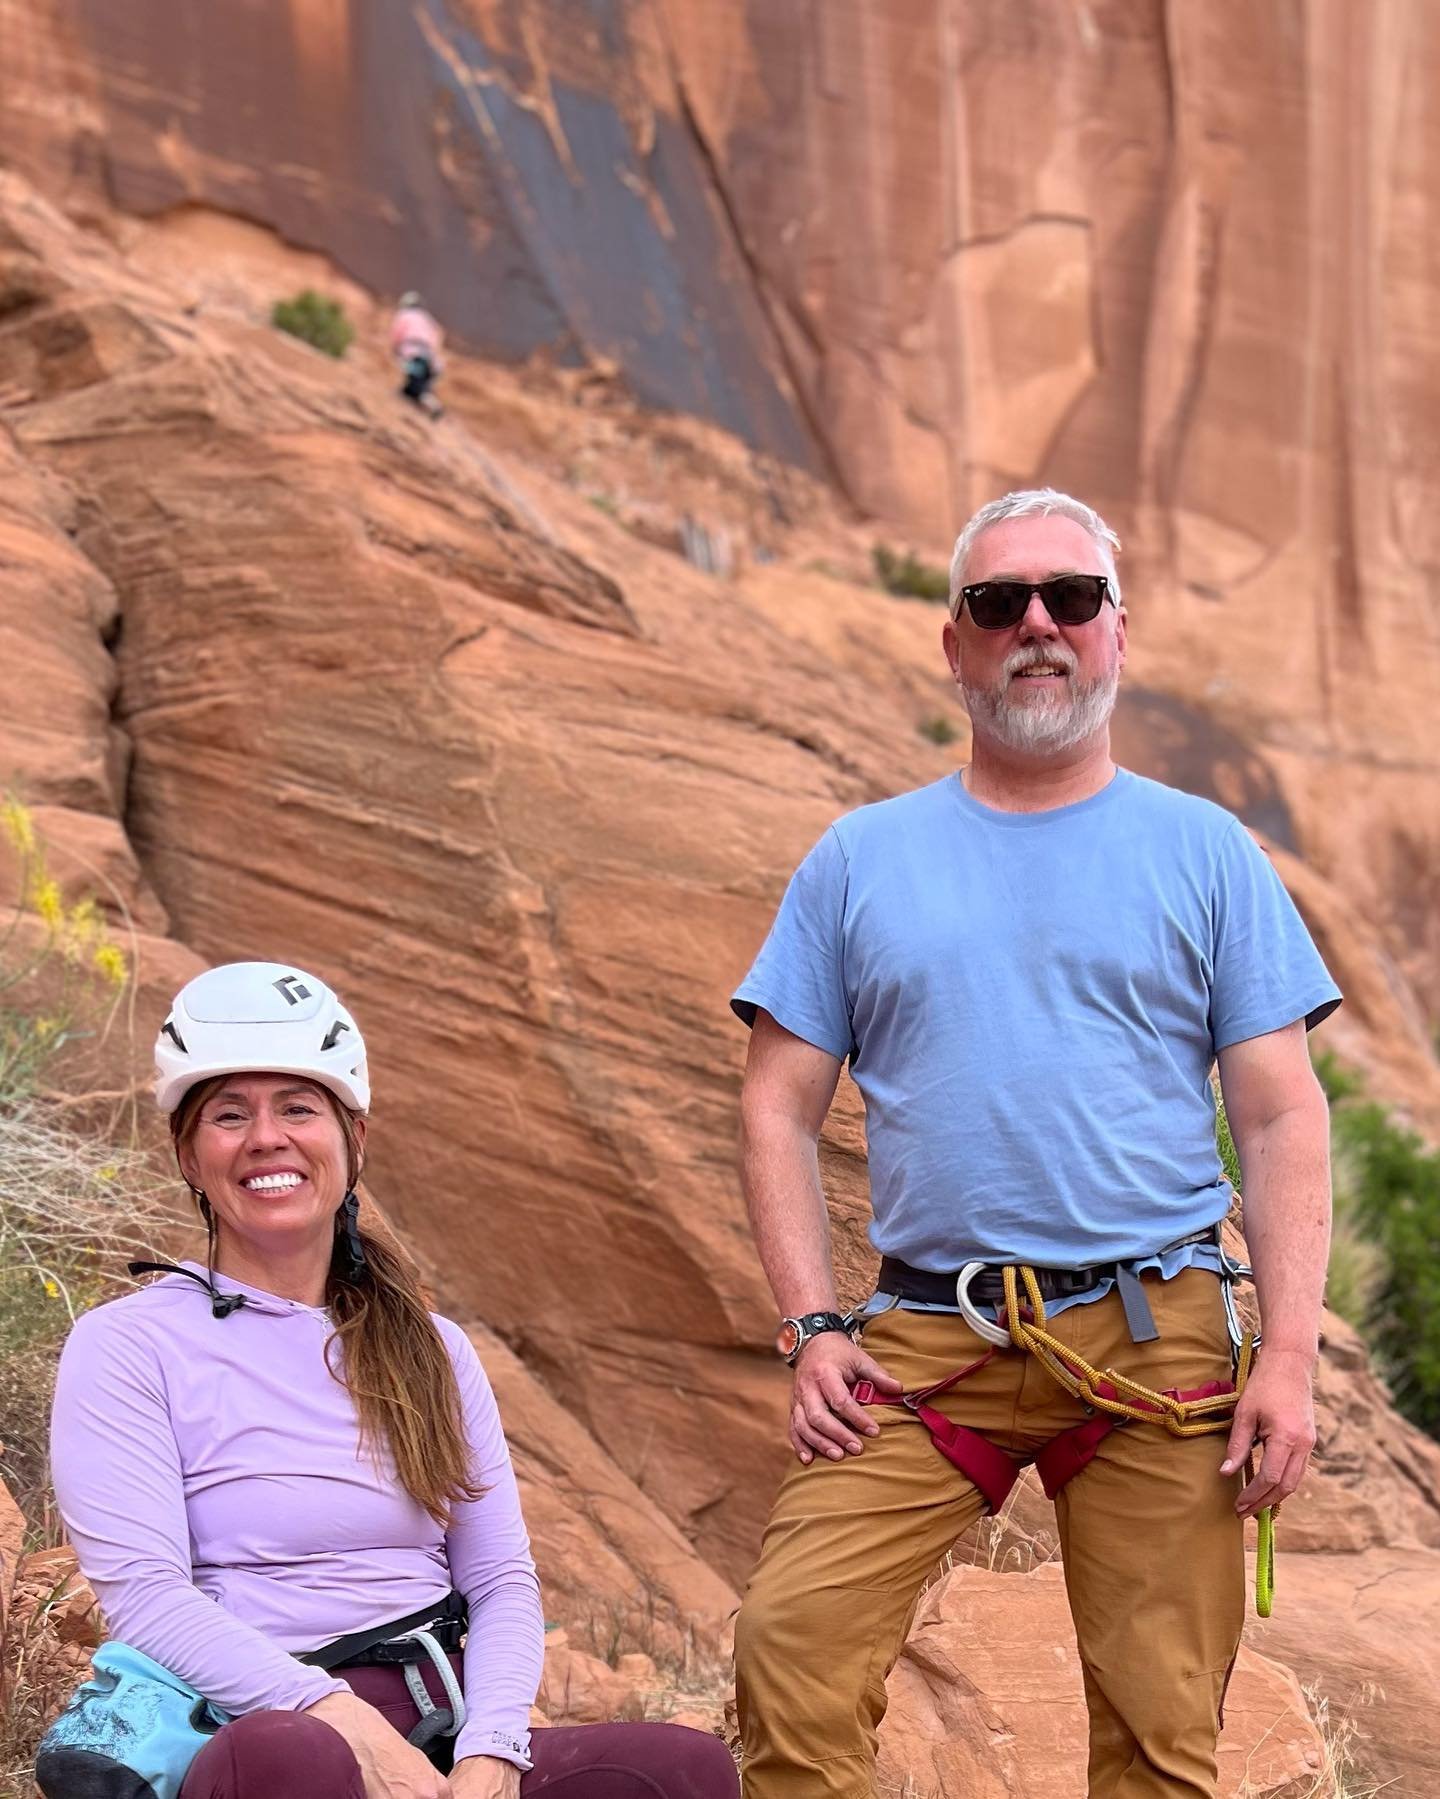 Some fun days working around interesting weather patterns, finding dry rock and enjoying desert sandstone pitches with Tara and Chris. #moabisthebest #bestofmoab #dreamtrips #moabrockclimbing #desertsandstone #portrait #moab #funeveryday